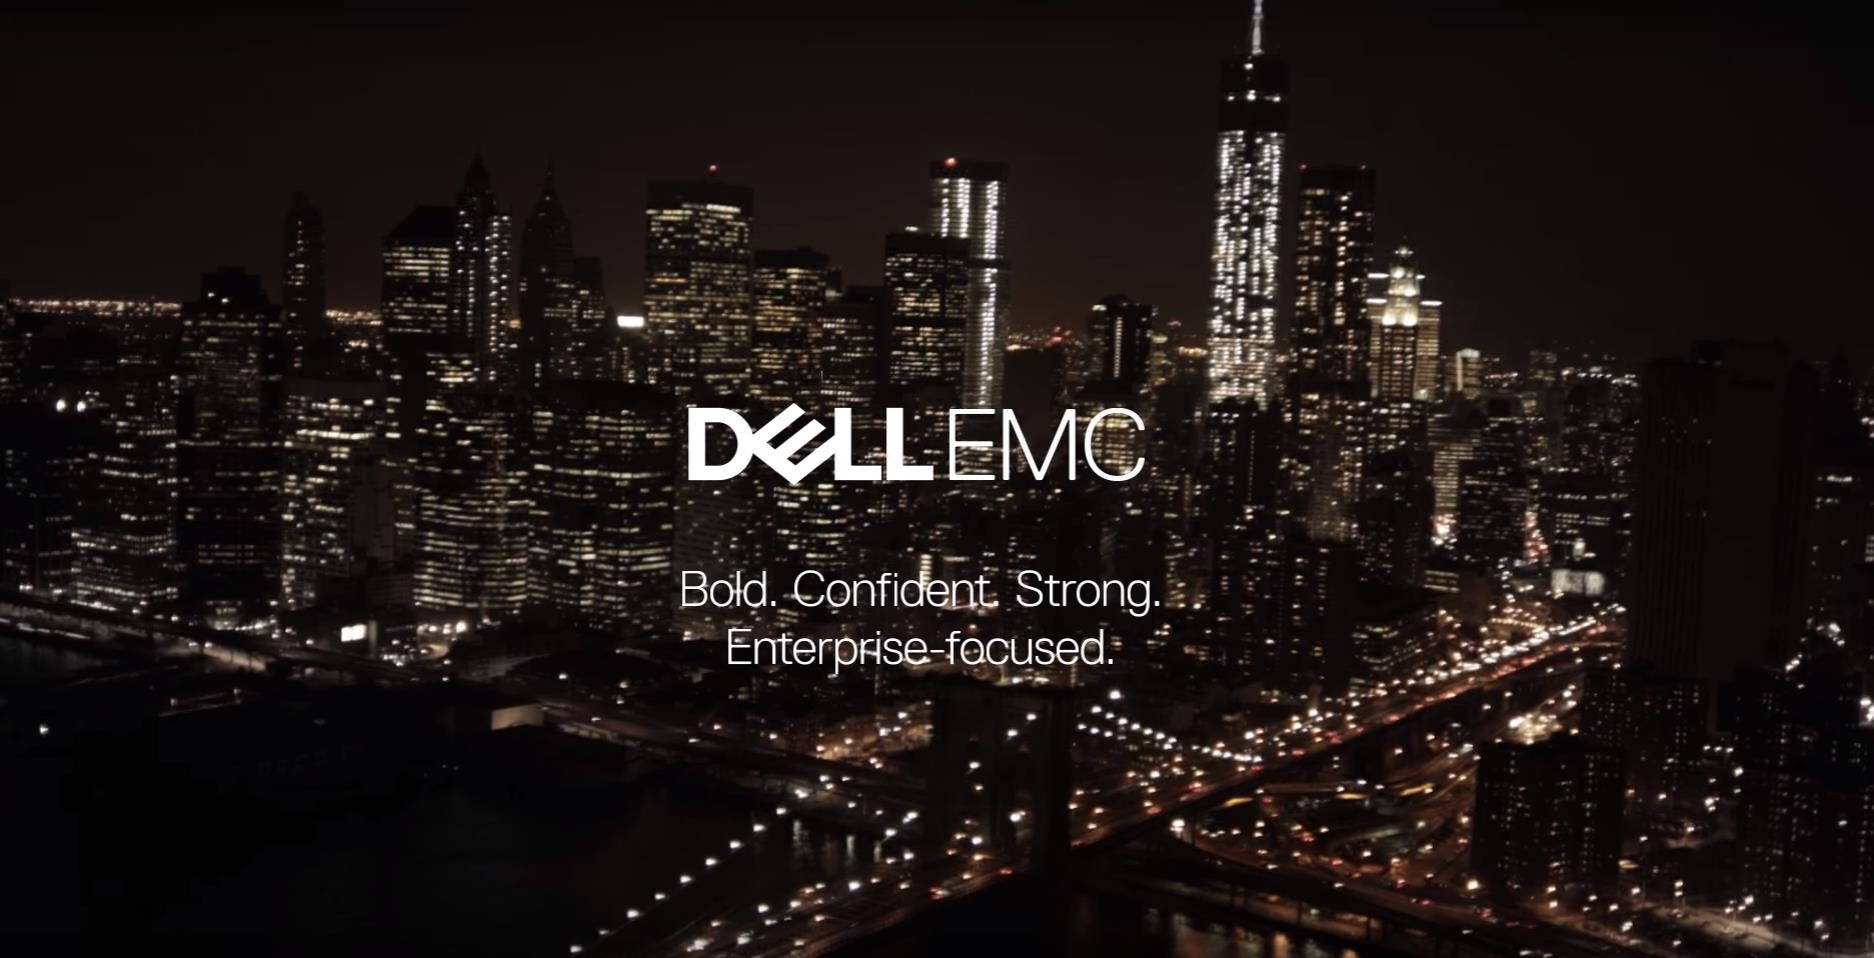 When two become one: Dell EMC sets its spirit free because it's the only way to be